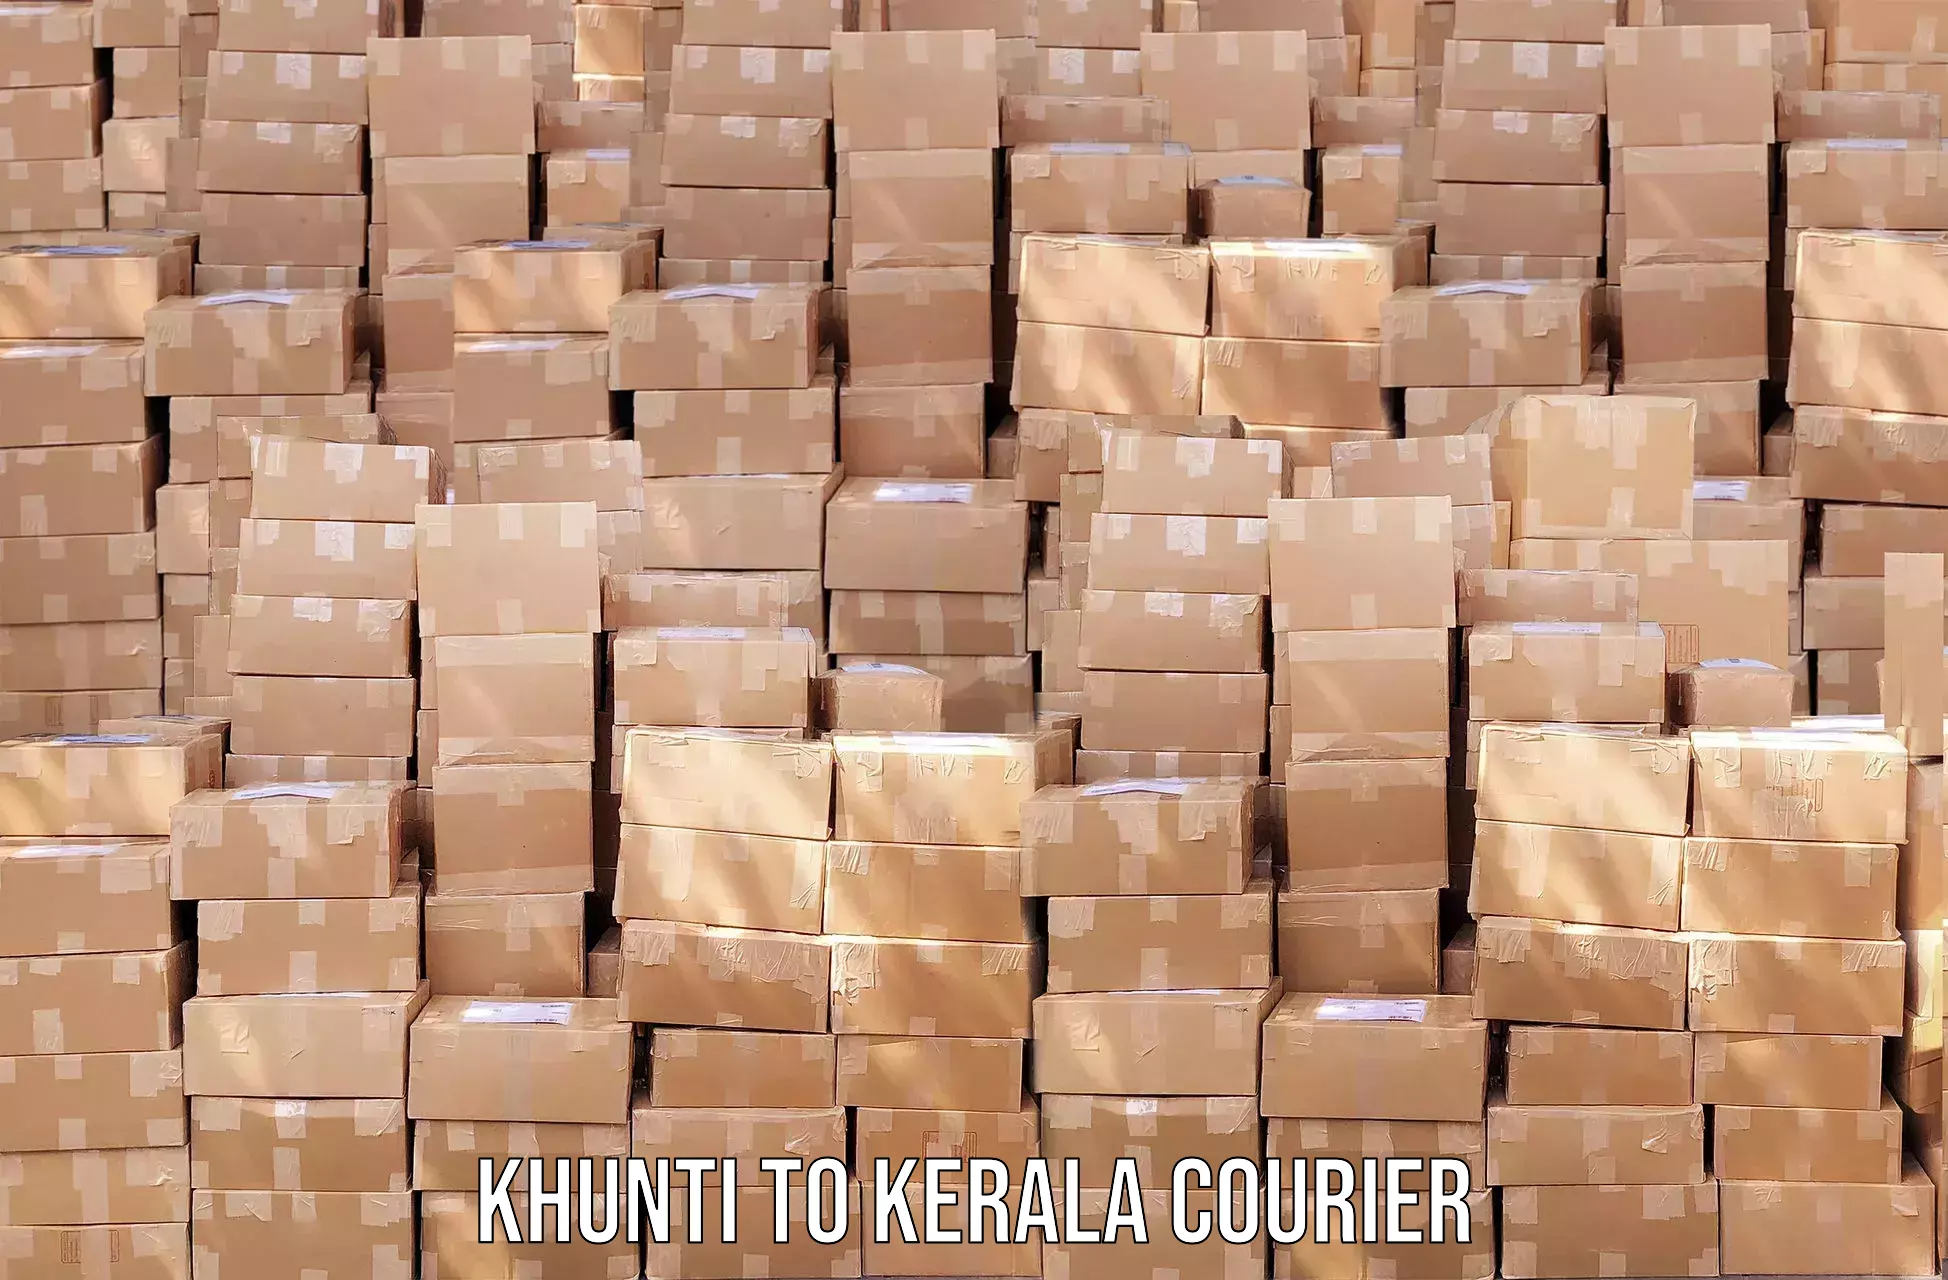 Cash on delivery service Khunti to Kerala